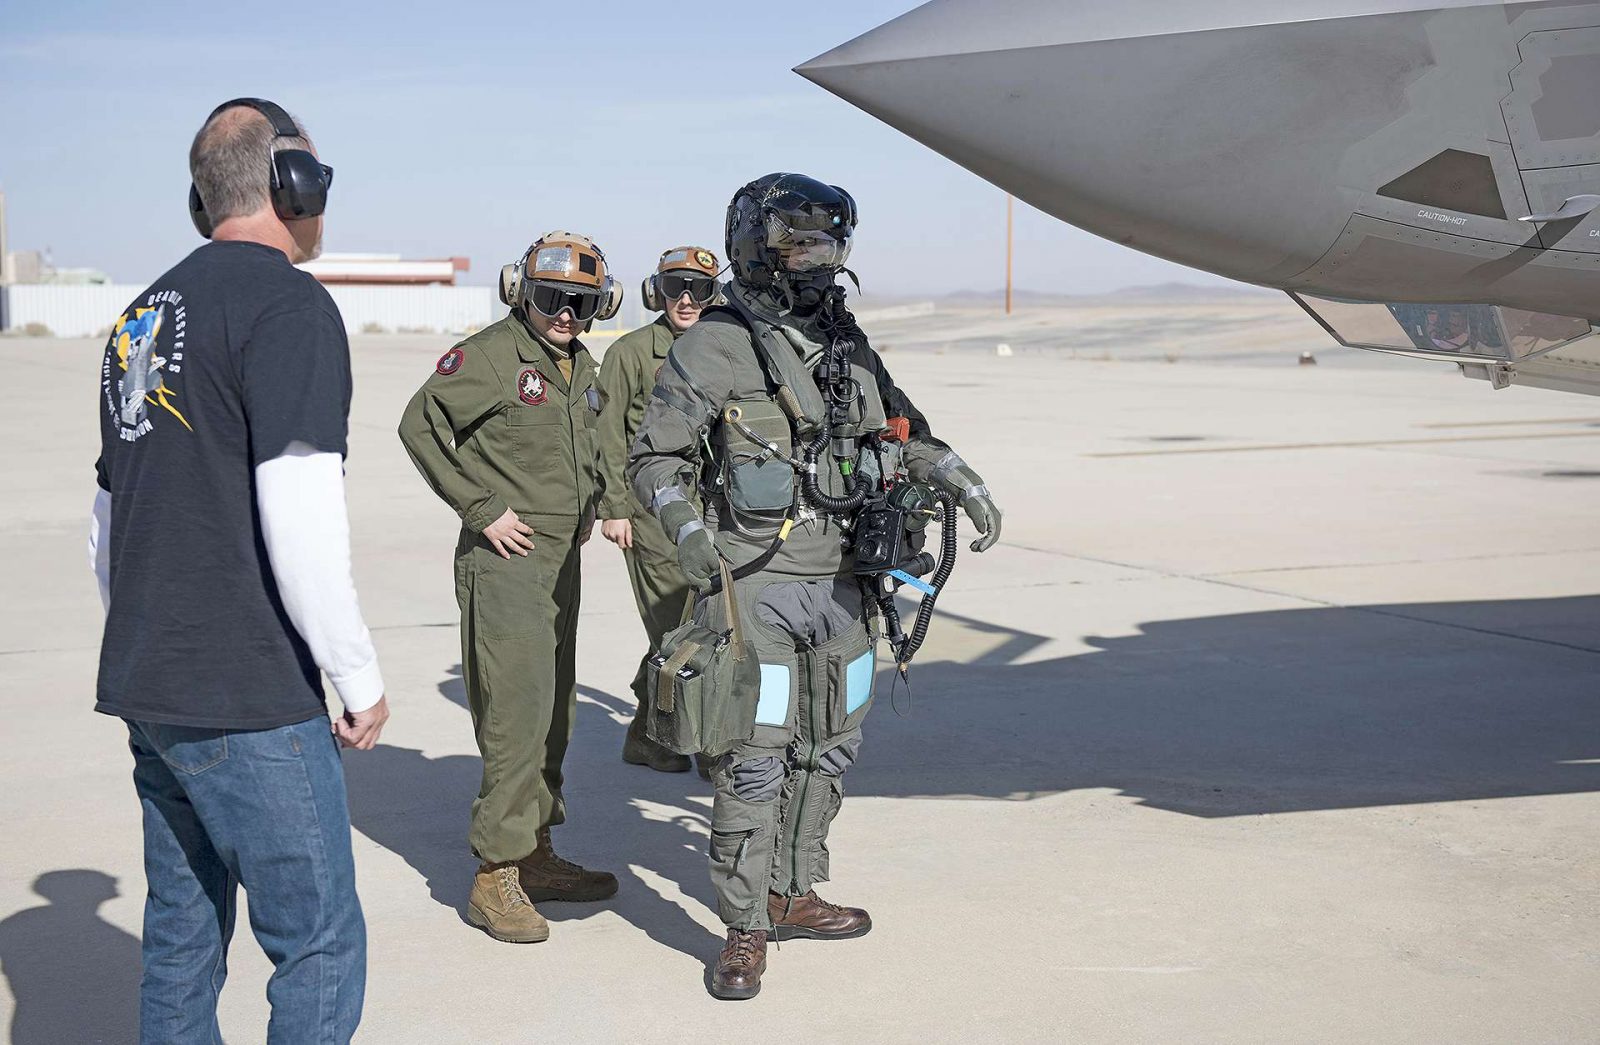 U.S. Air Force has tested a suit designed to protect the pilot from Chemical and ...1600 x 1045